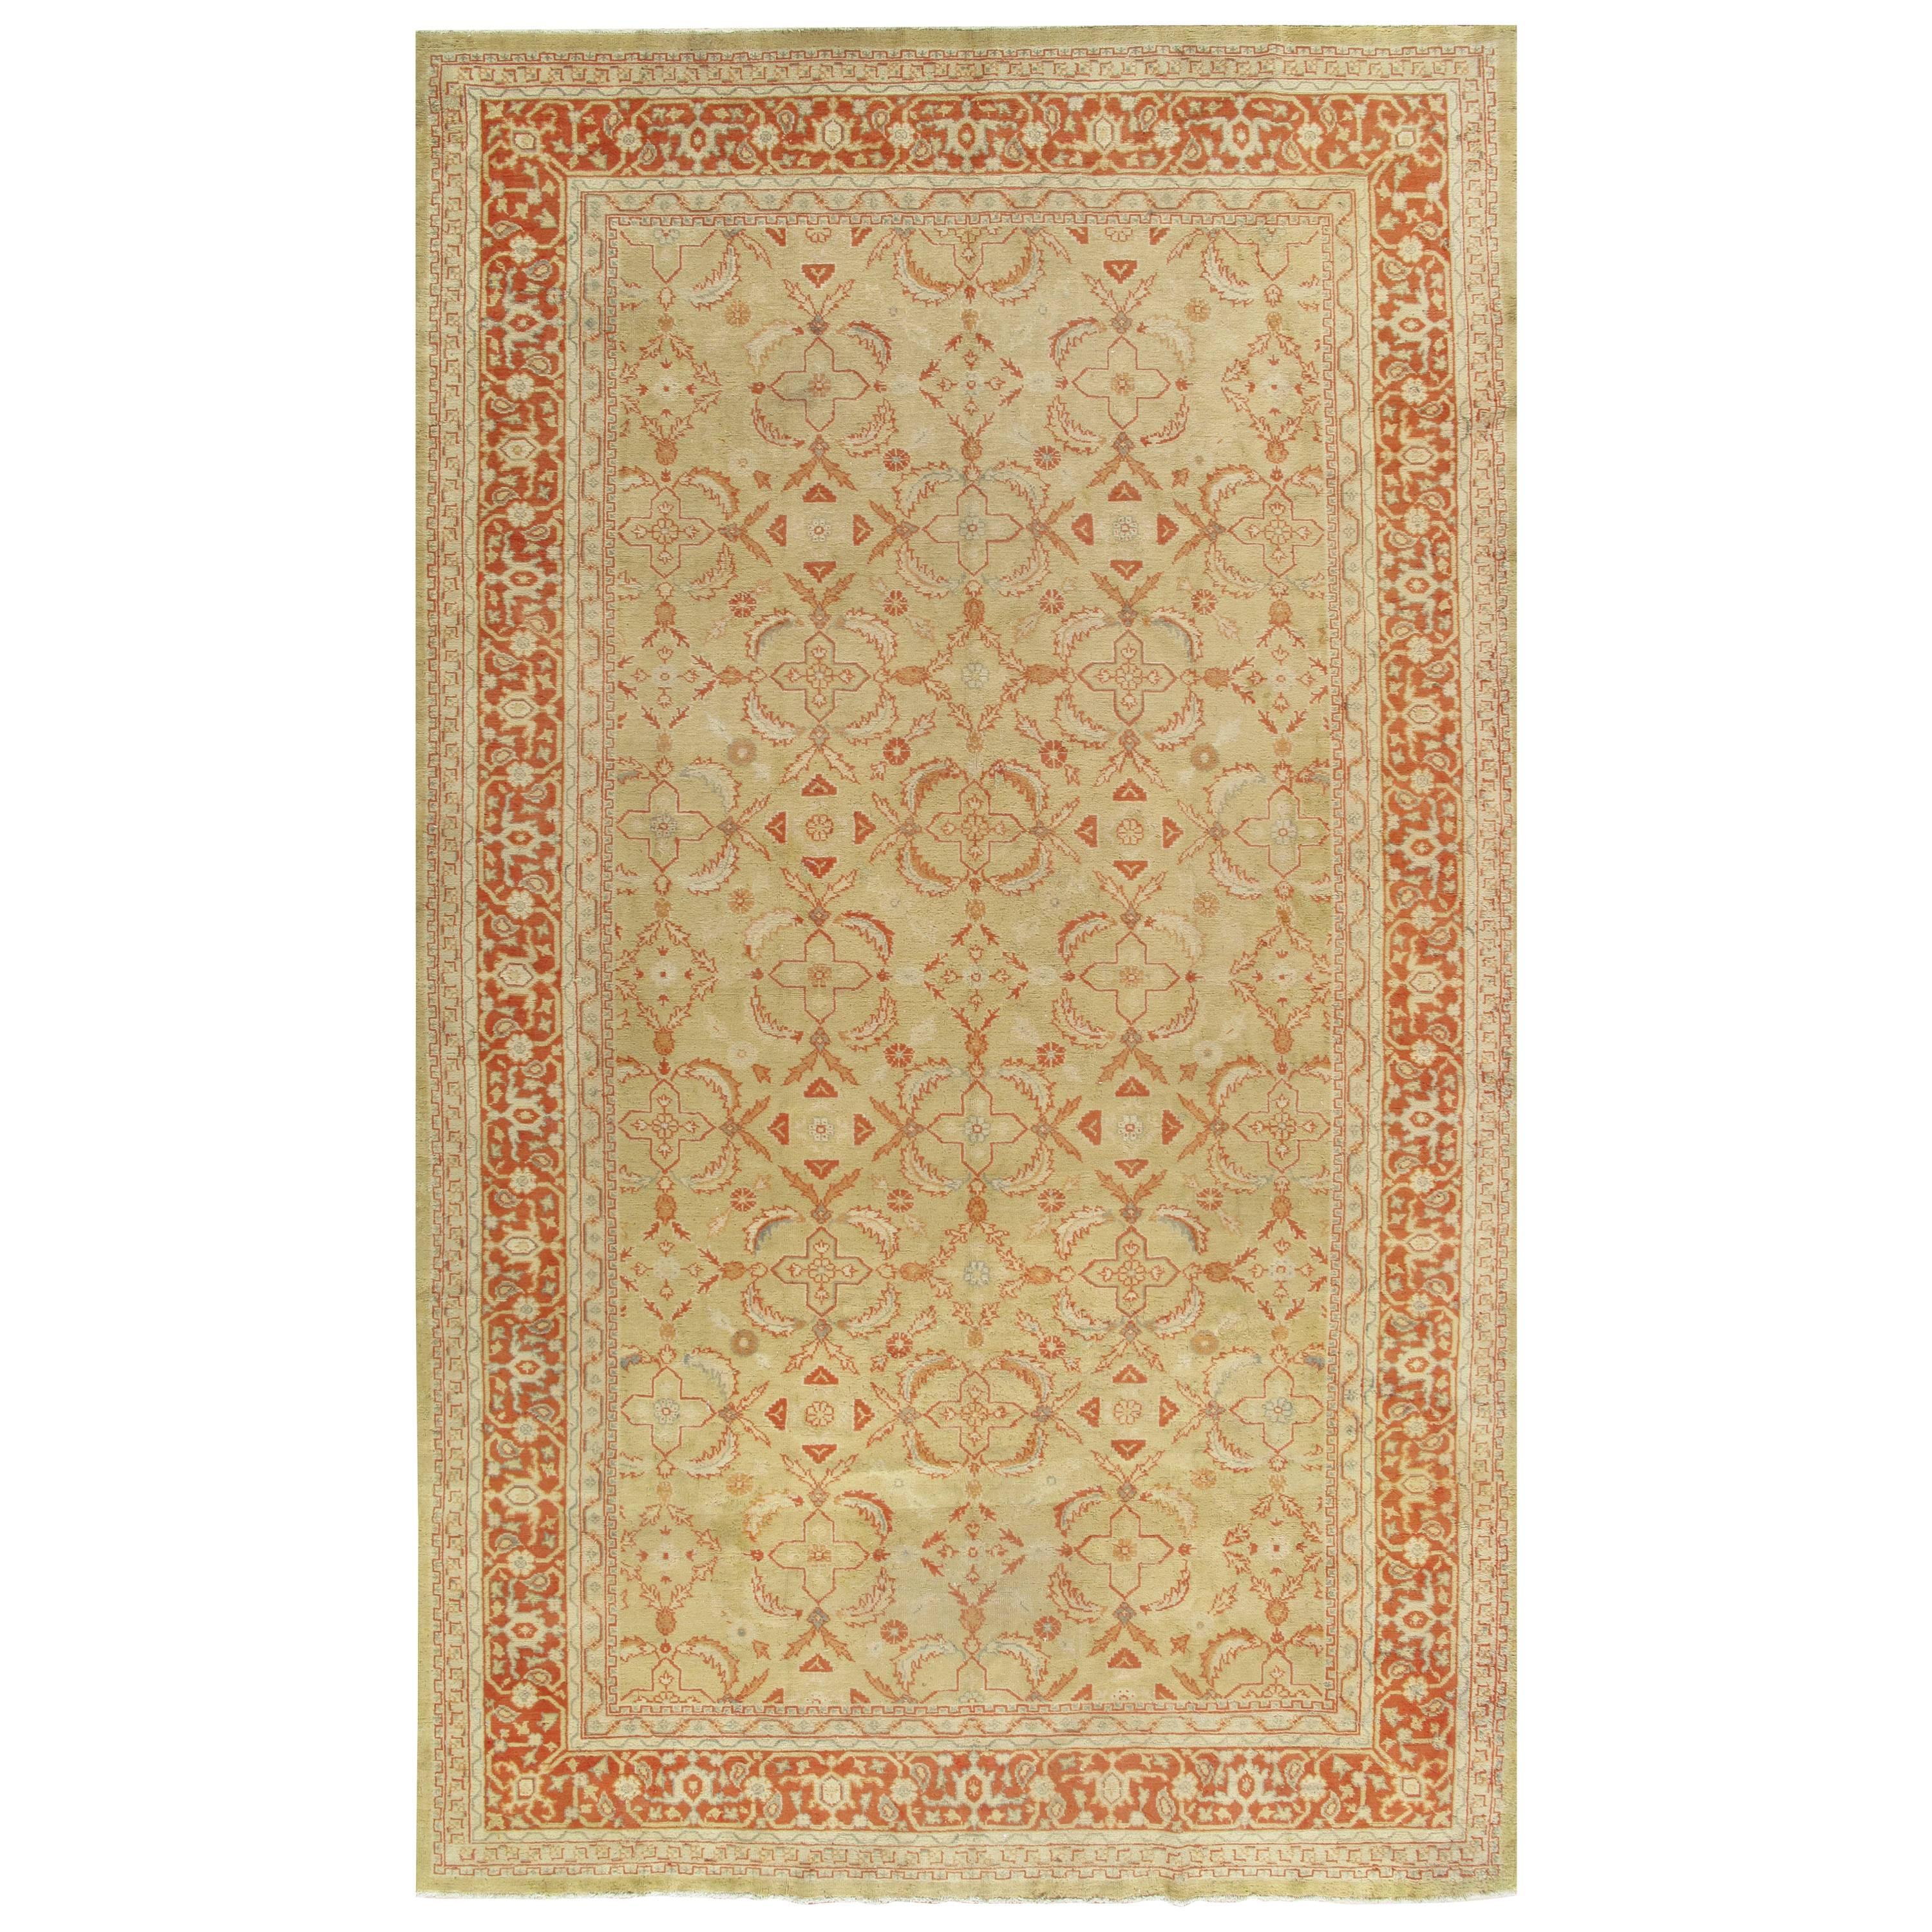 Antique Oushak Carpet Handmade Oriental Rug, Pale Green Coral, Taupe, Cream Fine For Sale